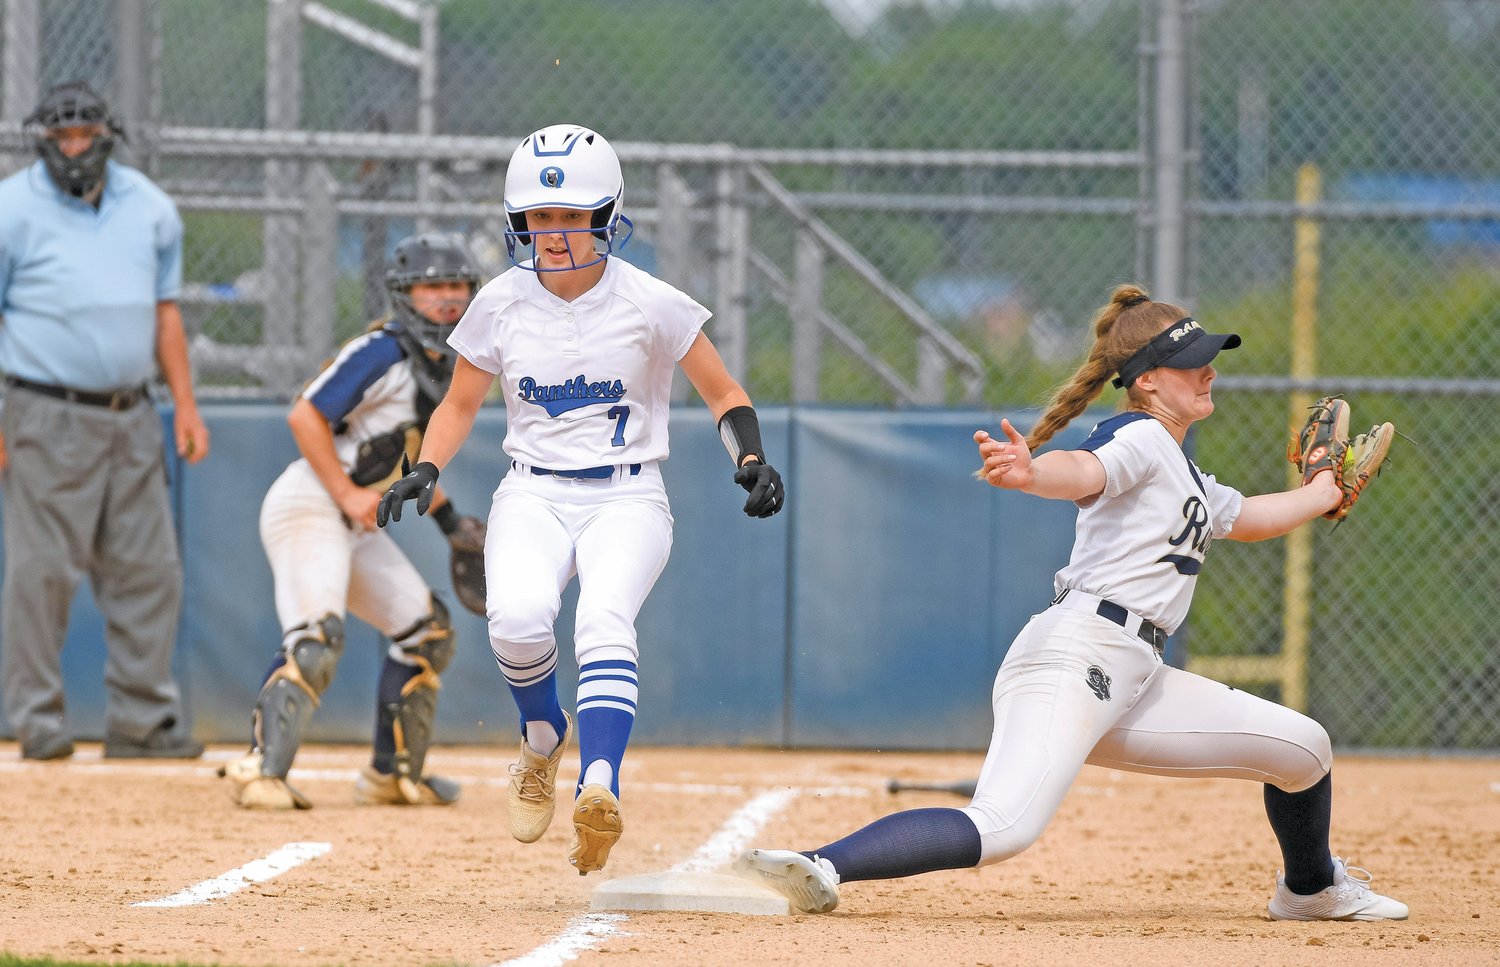 Quakertown’s Emma Hilton beats out an infield hit in front of Spring-Ford’s Madison Peck.